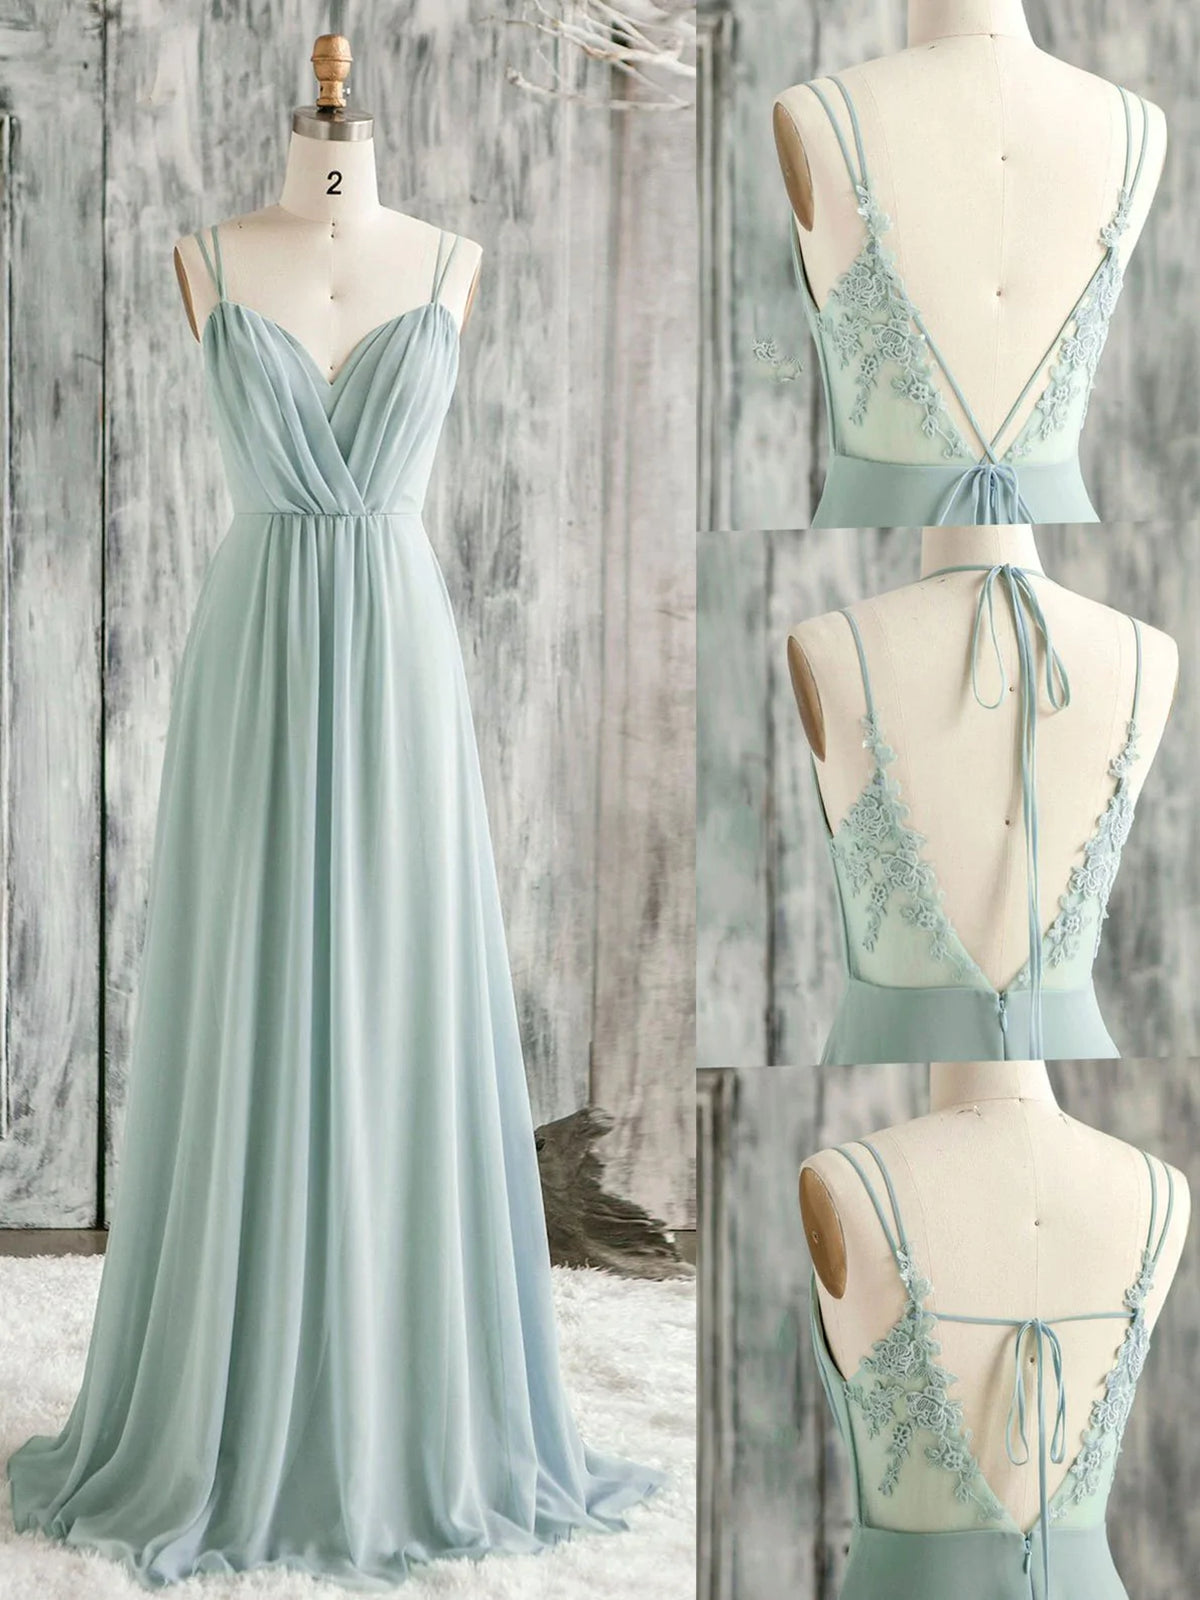 V Neck Mint Green Lace Prom Dresses For Black girls For Women, Mint Green Lace Formal Evening Dresses